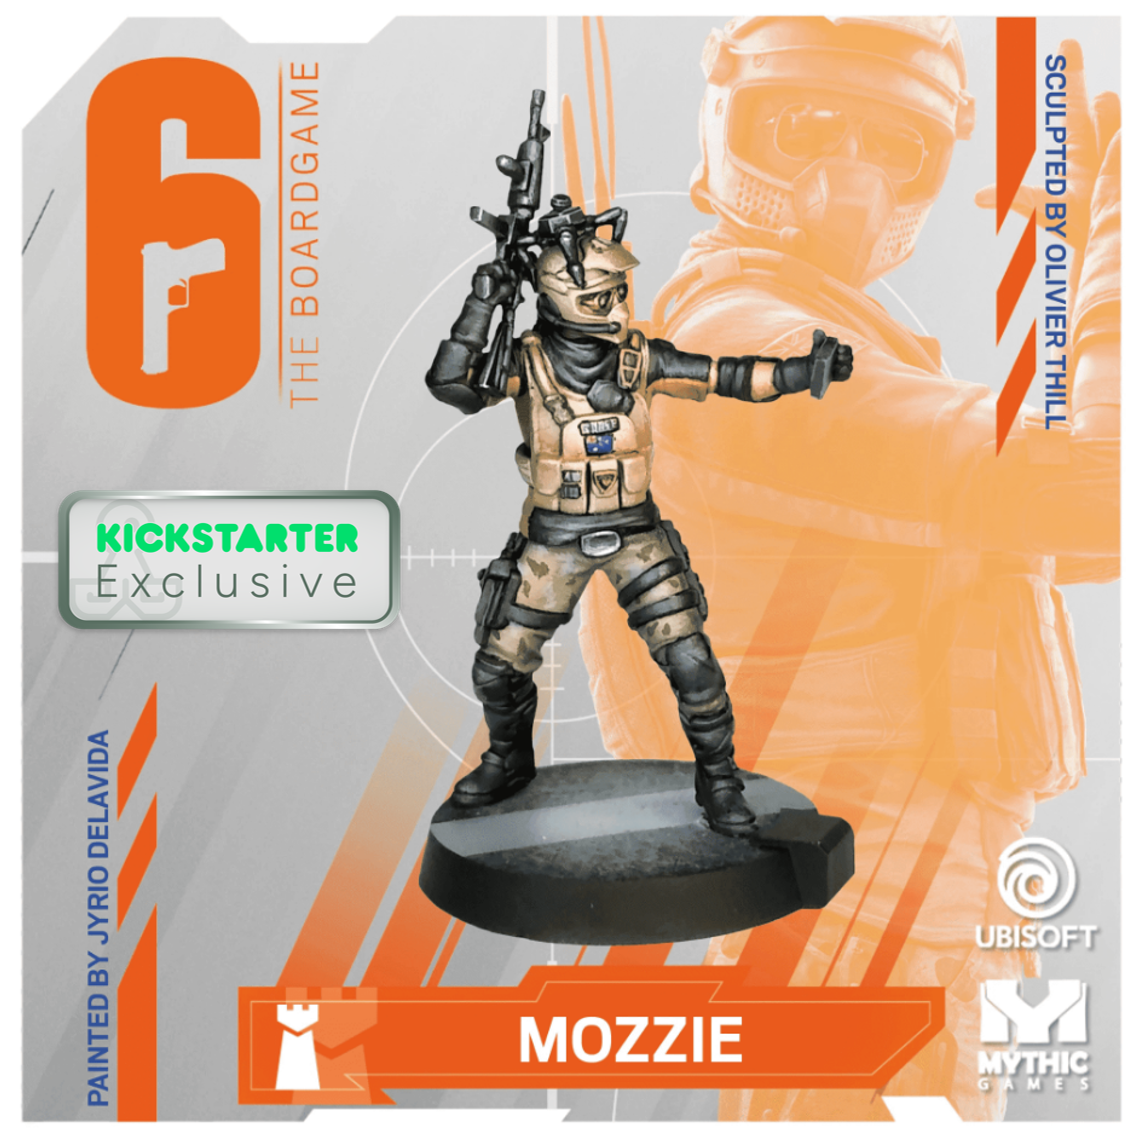 Kickstarter Exclusive Year 4 Expansion, Mozzie Miniature, From 6: Siege - The Board Game